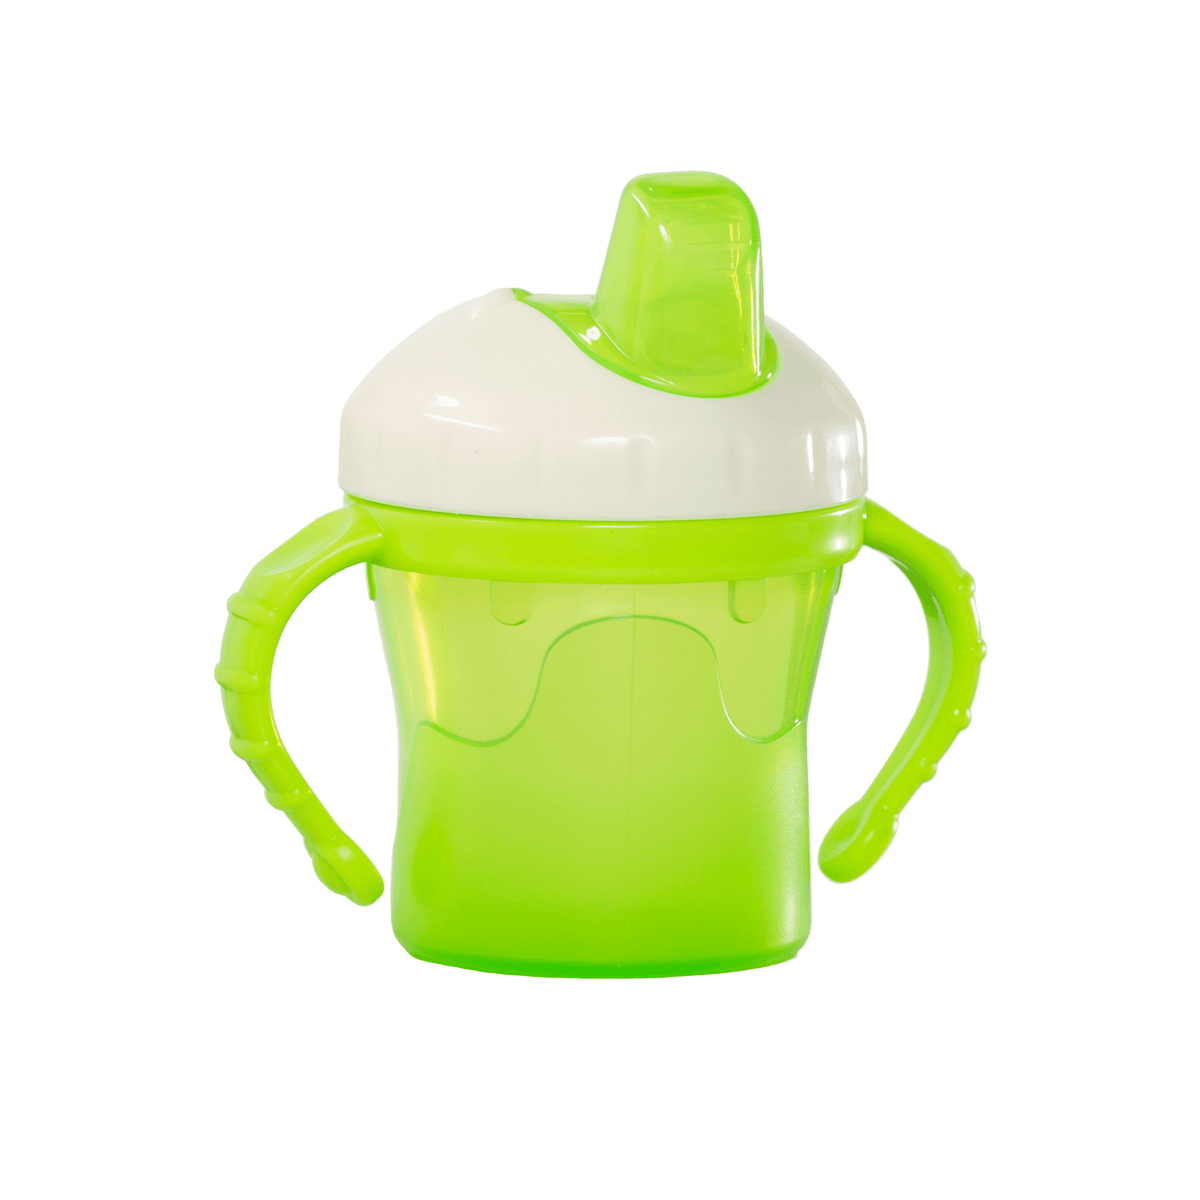 The Two Cup Set. Small cup with handles and spout cover. Green.